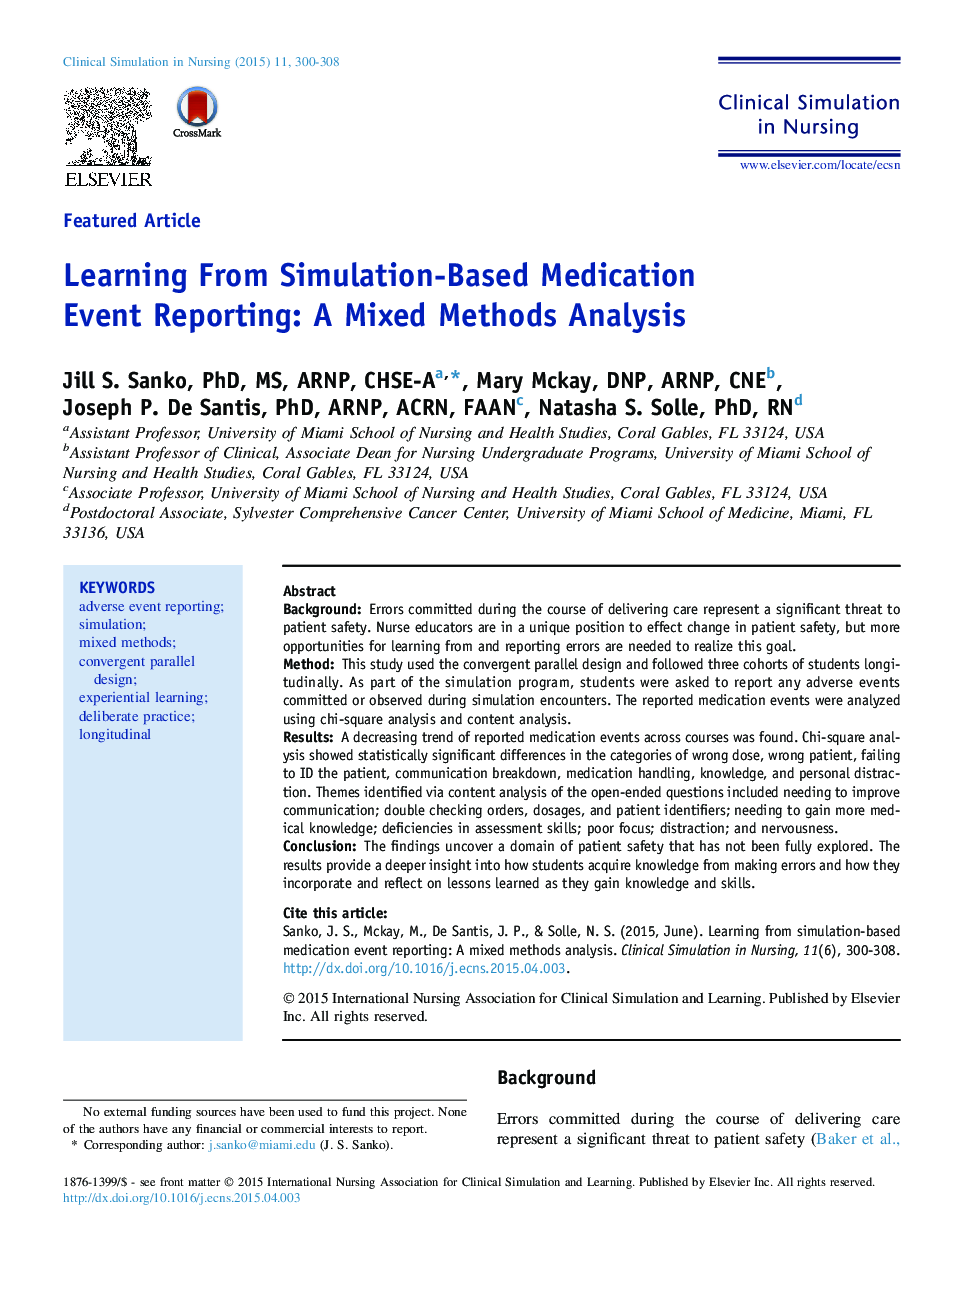 Learning From Simulation-Based Medication Event Reporting: A Mixed Methods Analysis 